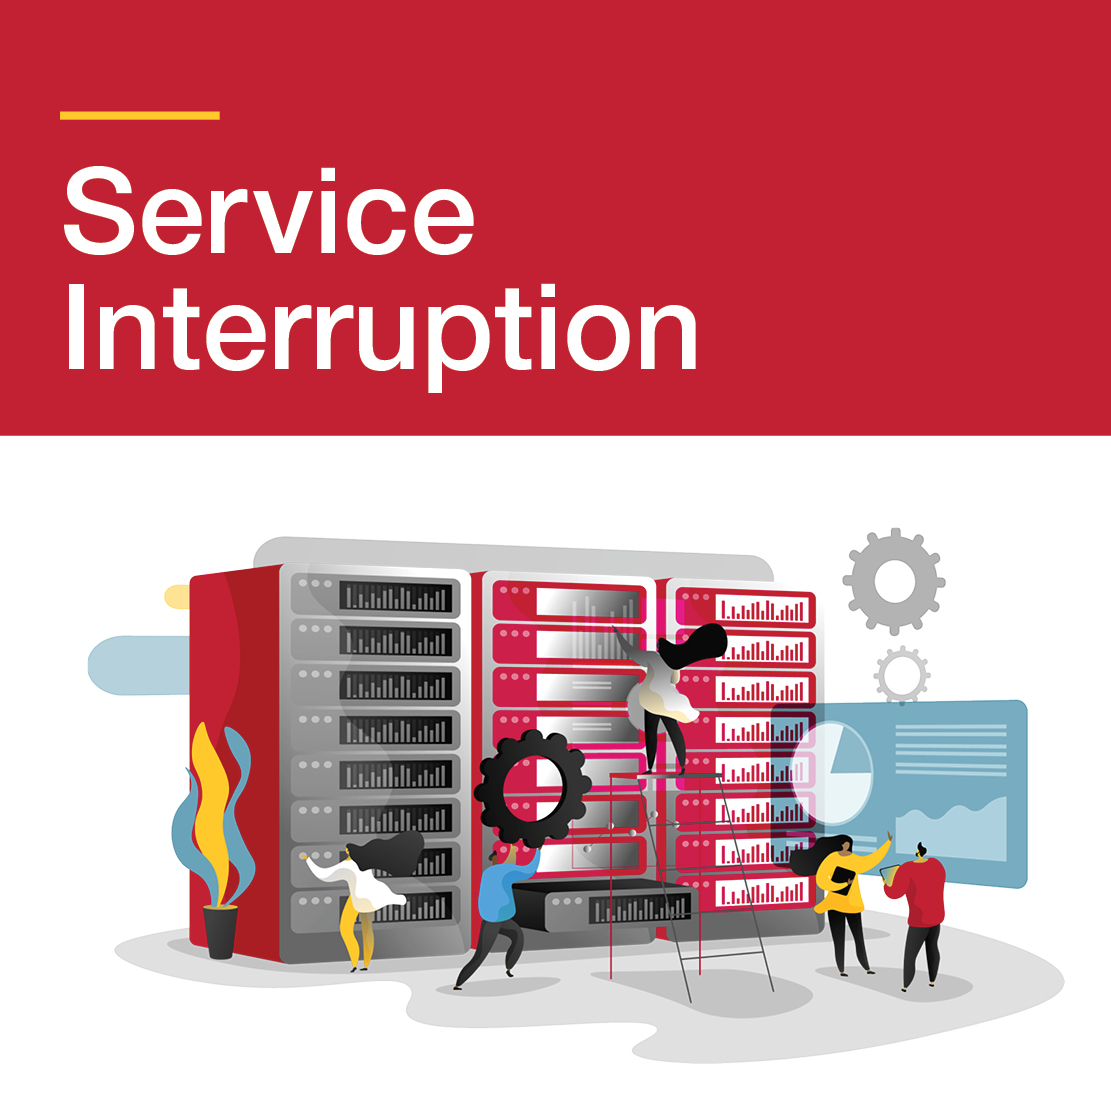 Graphic of people working on fixing an issue. The text reads, "Service Interruption."